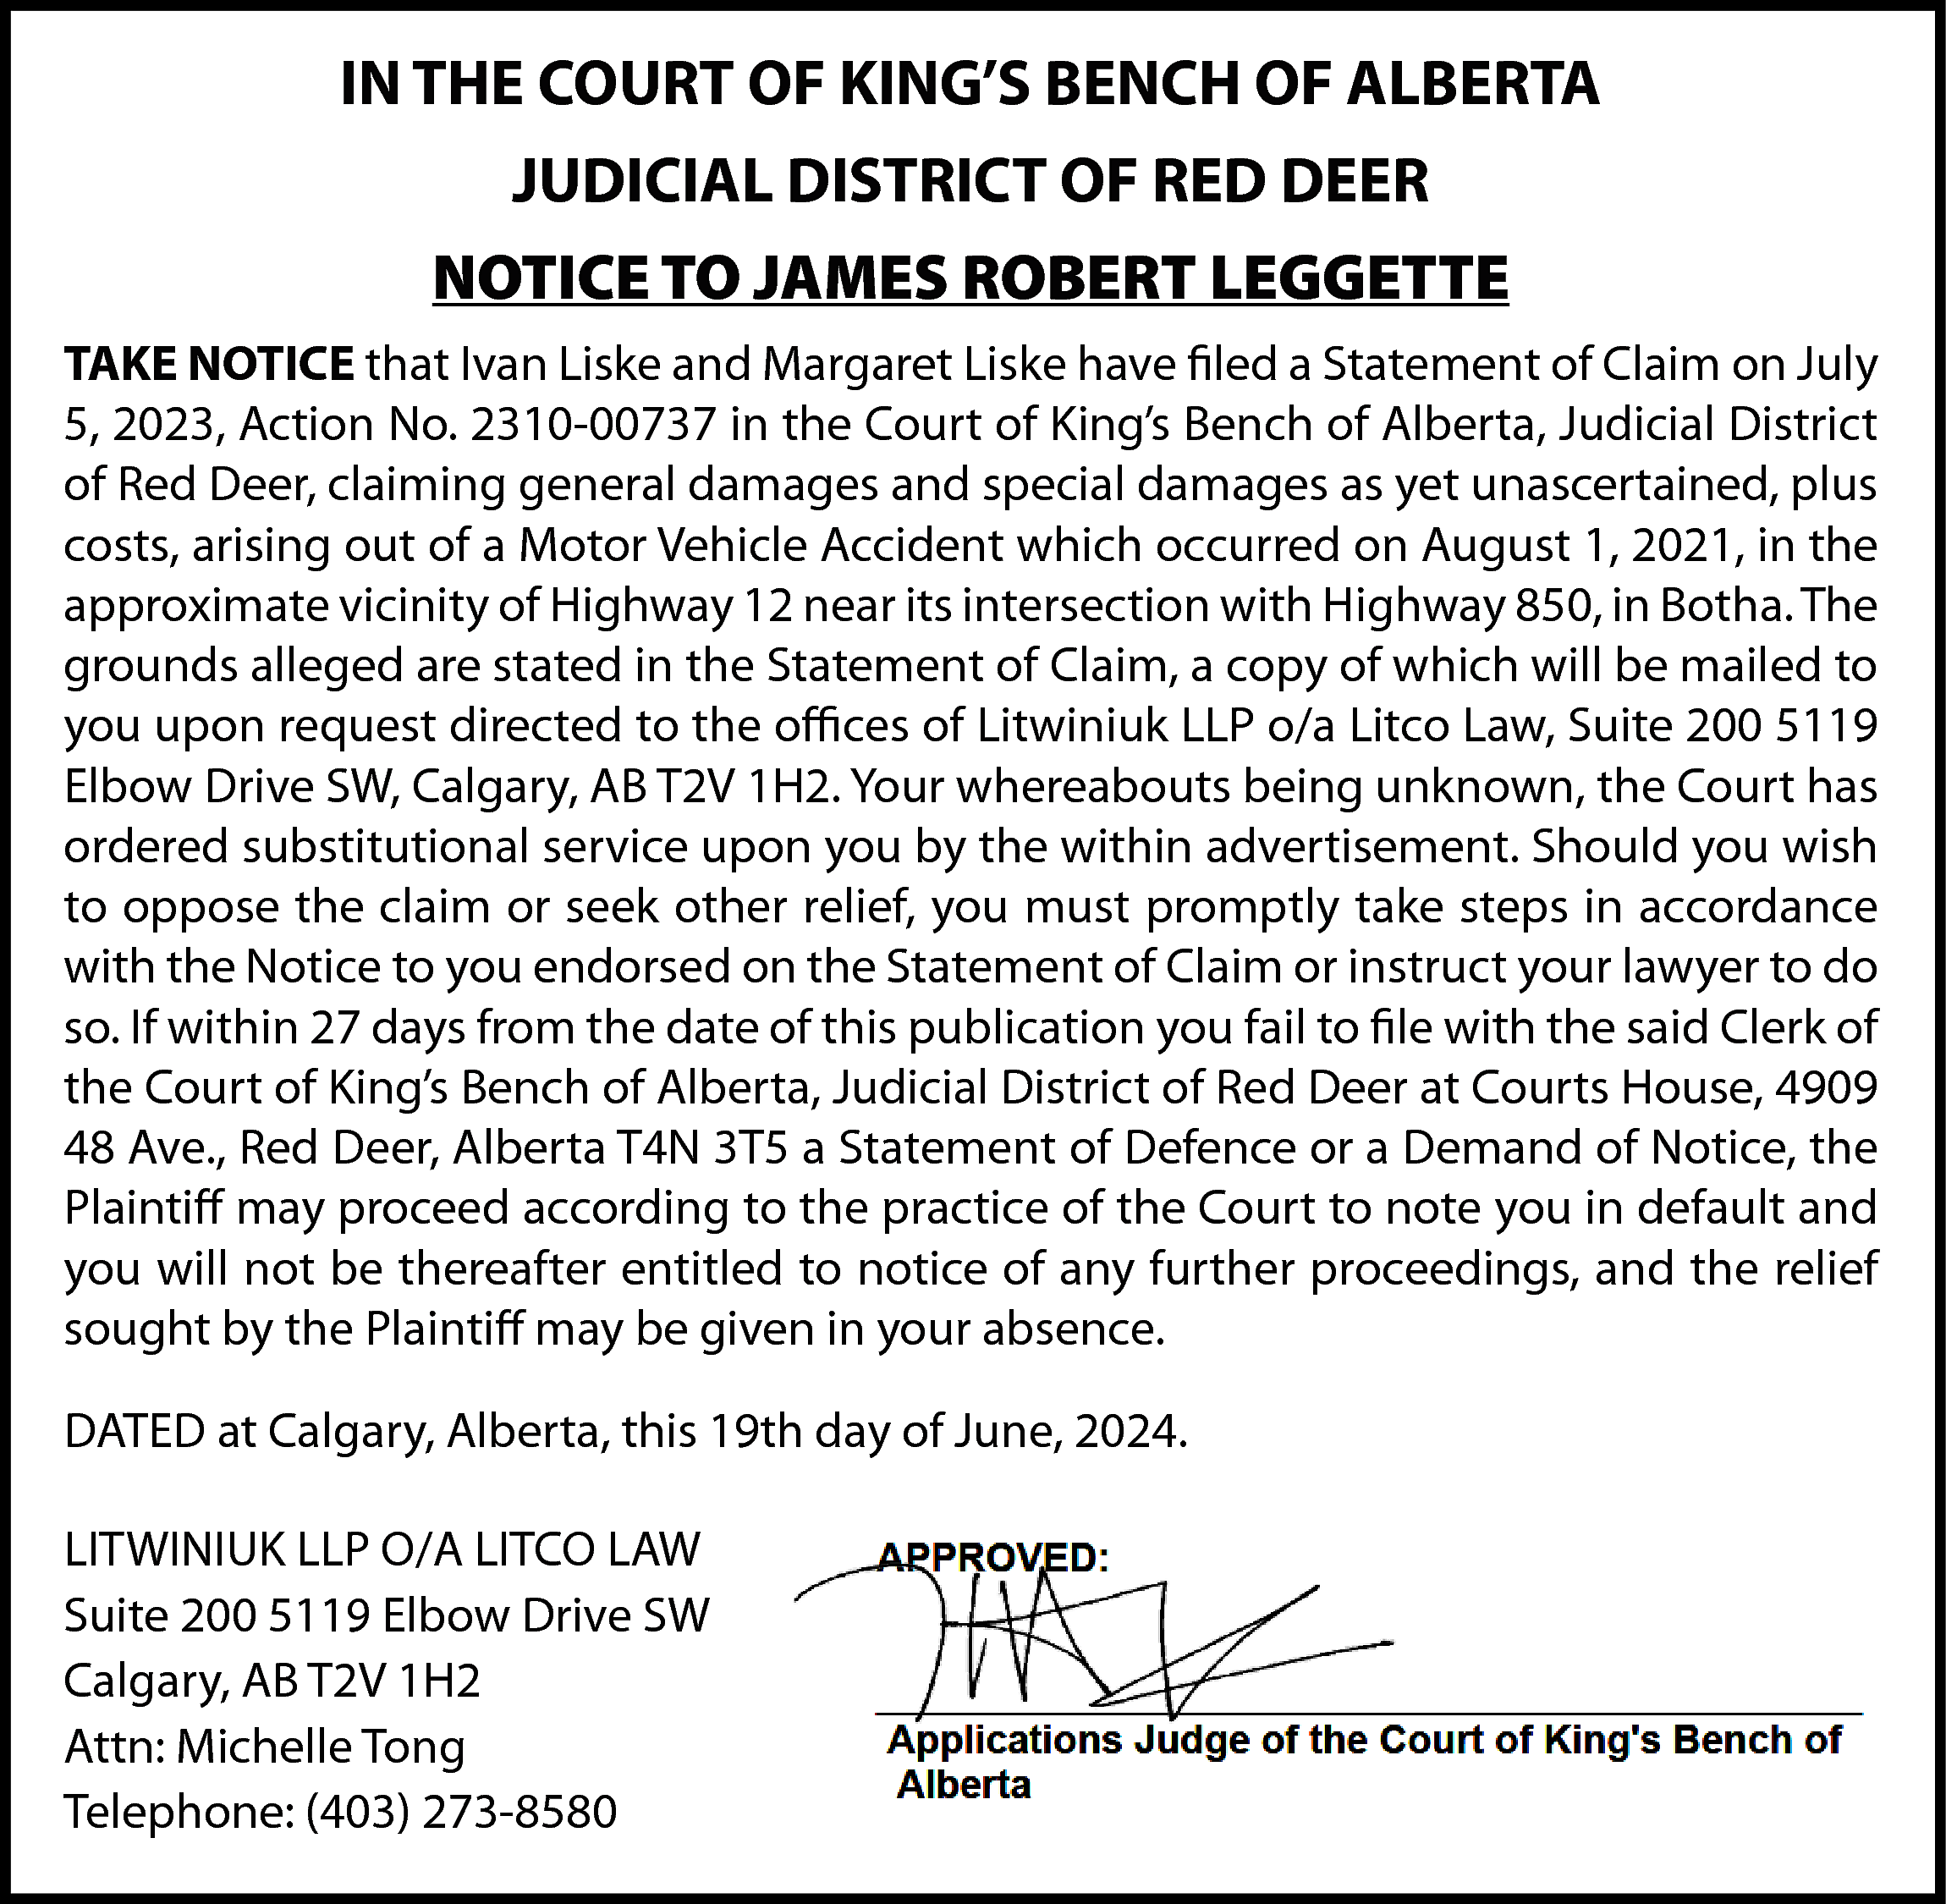 IN THE COURT OF KING’S  IN THE COURT OF KING’S BENCH OF ALBERTA  JUDICIAL DISTRICT OF RED DEER  NOTICE TO JAMES ROBERT LEGGETTE  TAKE NOTICE that Ivan Liske and Margaret Liske have filed a Statement of Claim on July  5, 2023, Action No. 2310-00737 in the Court of King’s Bench of Alberta, Judicial District  of Red Deer, claiming general damages and special damages as yet unascertained, plus  costs, arising out of a Motor Vehicle Accident which occurred on August 1, 2021, in the  approximate vicinity of Highway 12 near its intersection with Highway 850, in Botha. The  grounds alleged are stated in the Statement of Claim, a copy of which will be mailed to  you upon request directed to the offices of Litwiniuk LLP o/a Litco Law, Suite 200 5119  Elbow Drive SW, Calgary, AB T2V 1H2. Your whereabouts being unknown, the Court has  ordered substitutional service upon you by the within advertisement. Should you wish  to oppose the claim or seek other relief, you must promptly take steps in accordance  with the Notice to you endorsed on the Statement of Claim or instruct your lawyer to do  so. If within 27 days from the date of this publication you fail to file with the said Clerk of  the Court of King’s Bench of Alberta, Judicial District of Red Deer at Courts House, 4909  48 Ave., Red Deer, Alberta T4N 3T5 a Statement of Defence or a Demand of Notice, the  Plaintiff may proceed according to the practice of the Court to note you in default and  you will not be thereafter entitled to notice of any further proceedings, and the relief  sought by the Plaintiff may be given in your absence.  DATED at Calgary, Alberta, this 19th day of June, 2024.  LITWINIUK LLP O/A LITCO LAW  Suite 200 5119 Elbow Drive SW  Calgary, AB T2V 1H2  Attn: Michelle Tong  Telephone: (403) 273-8580    